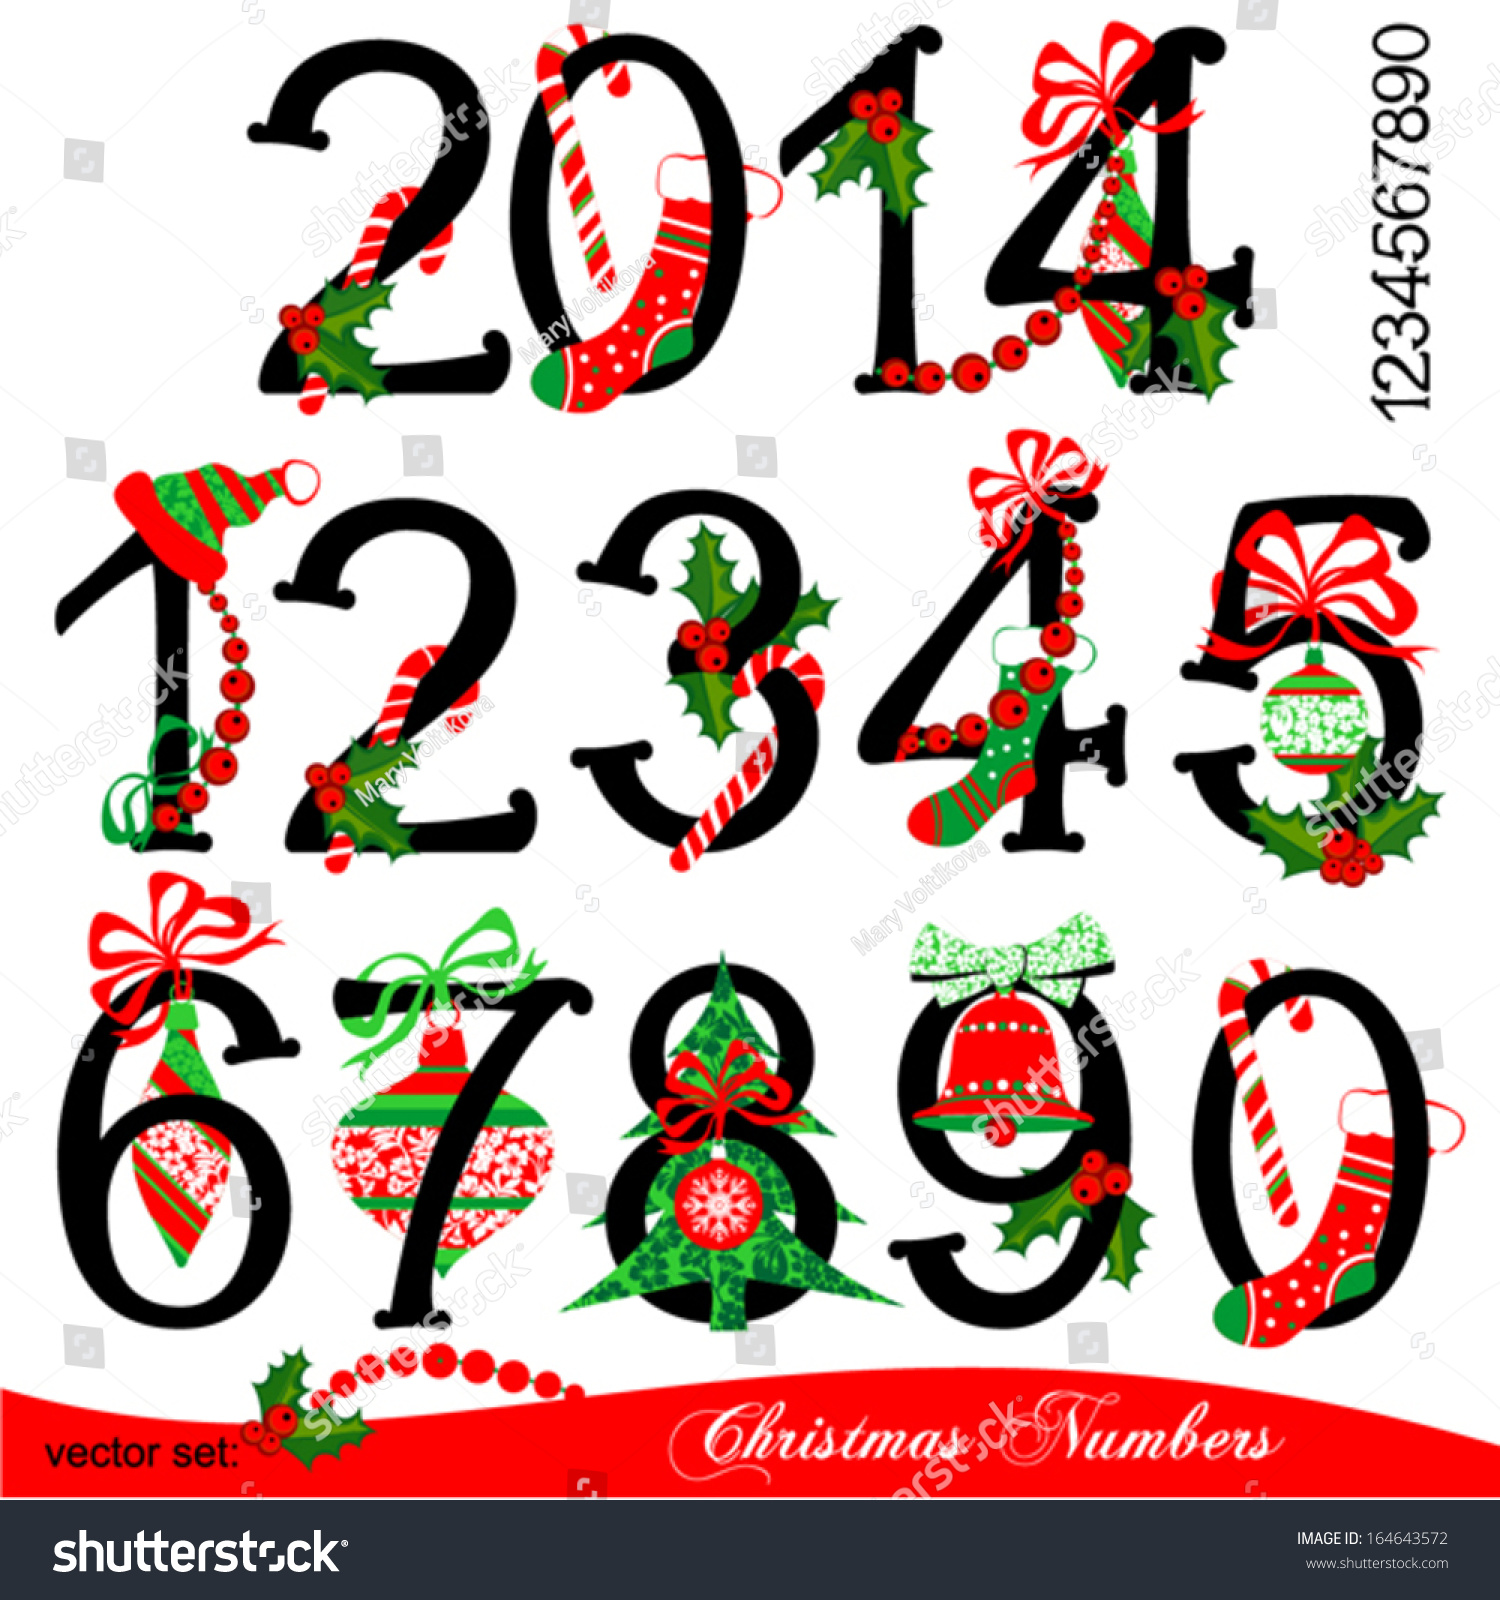 Download Collection Isolated Christmas Numbers On White Stock ...